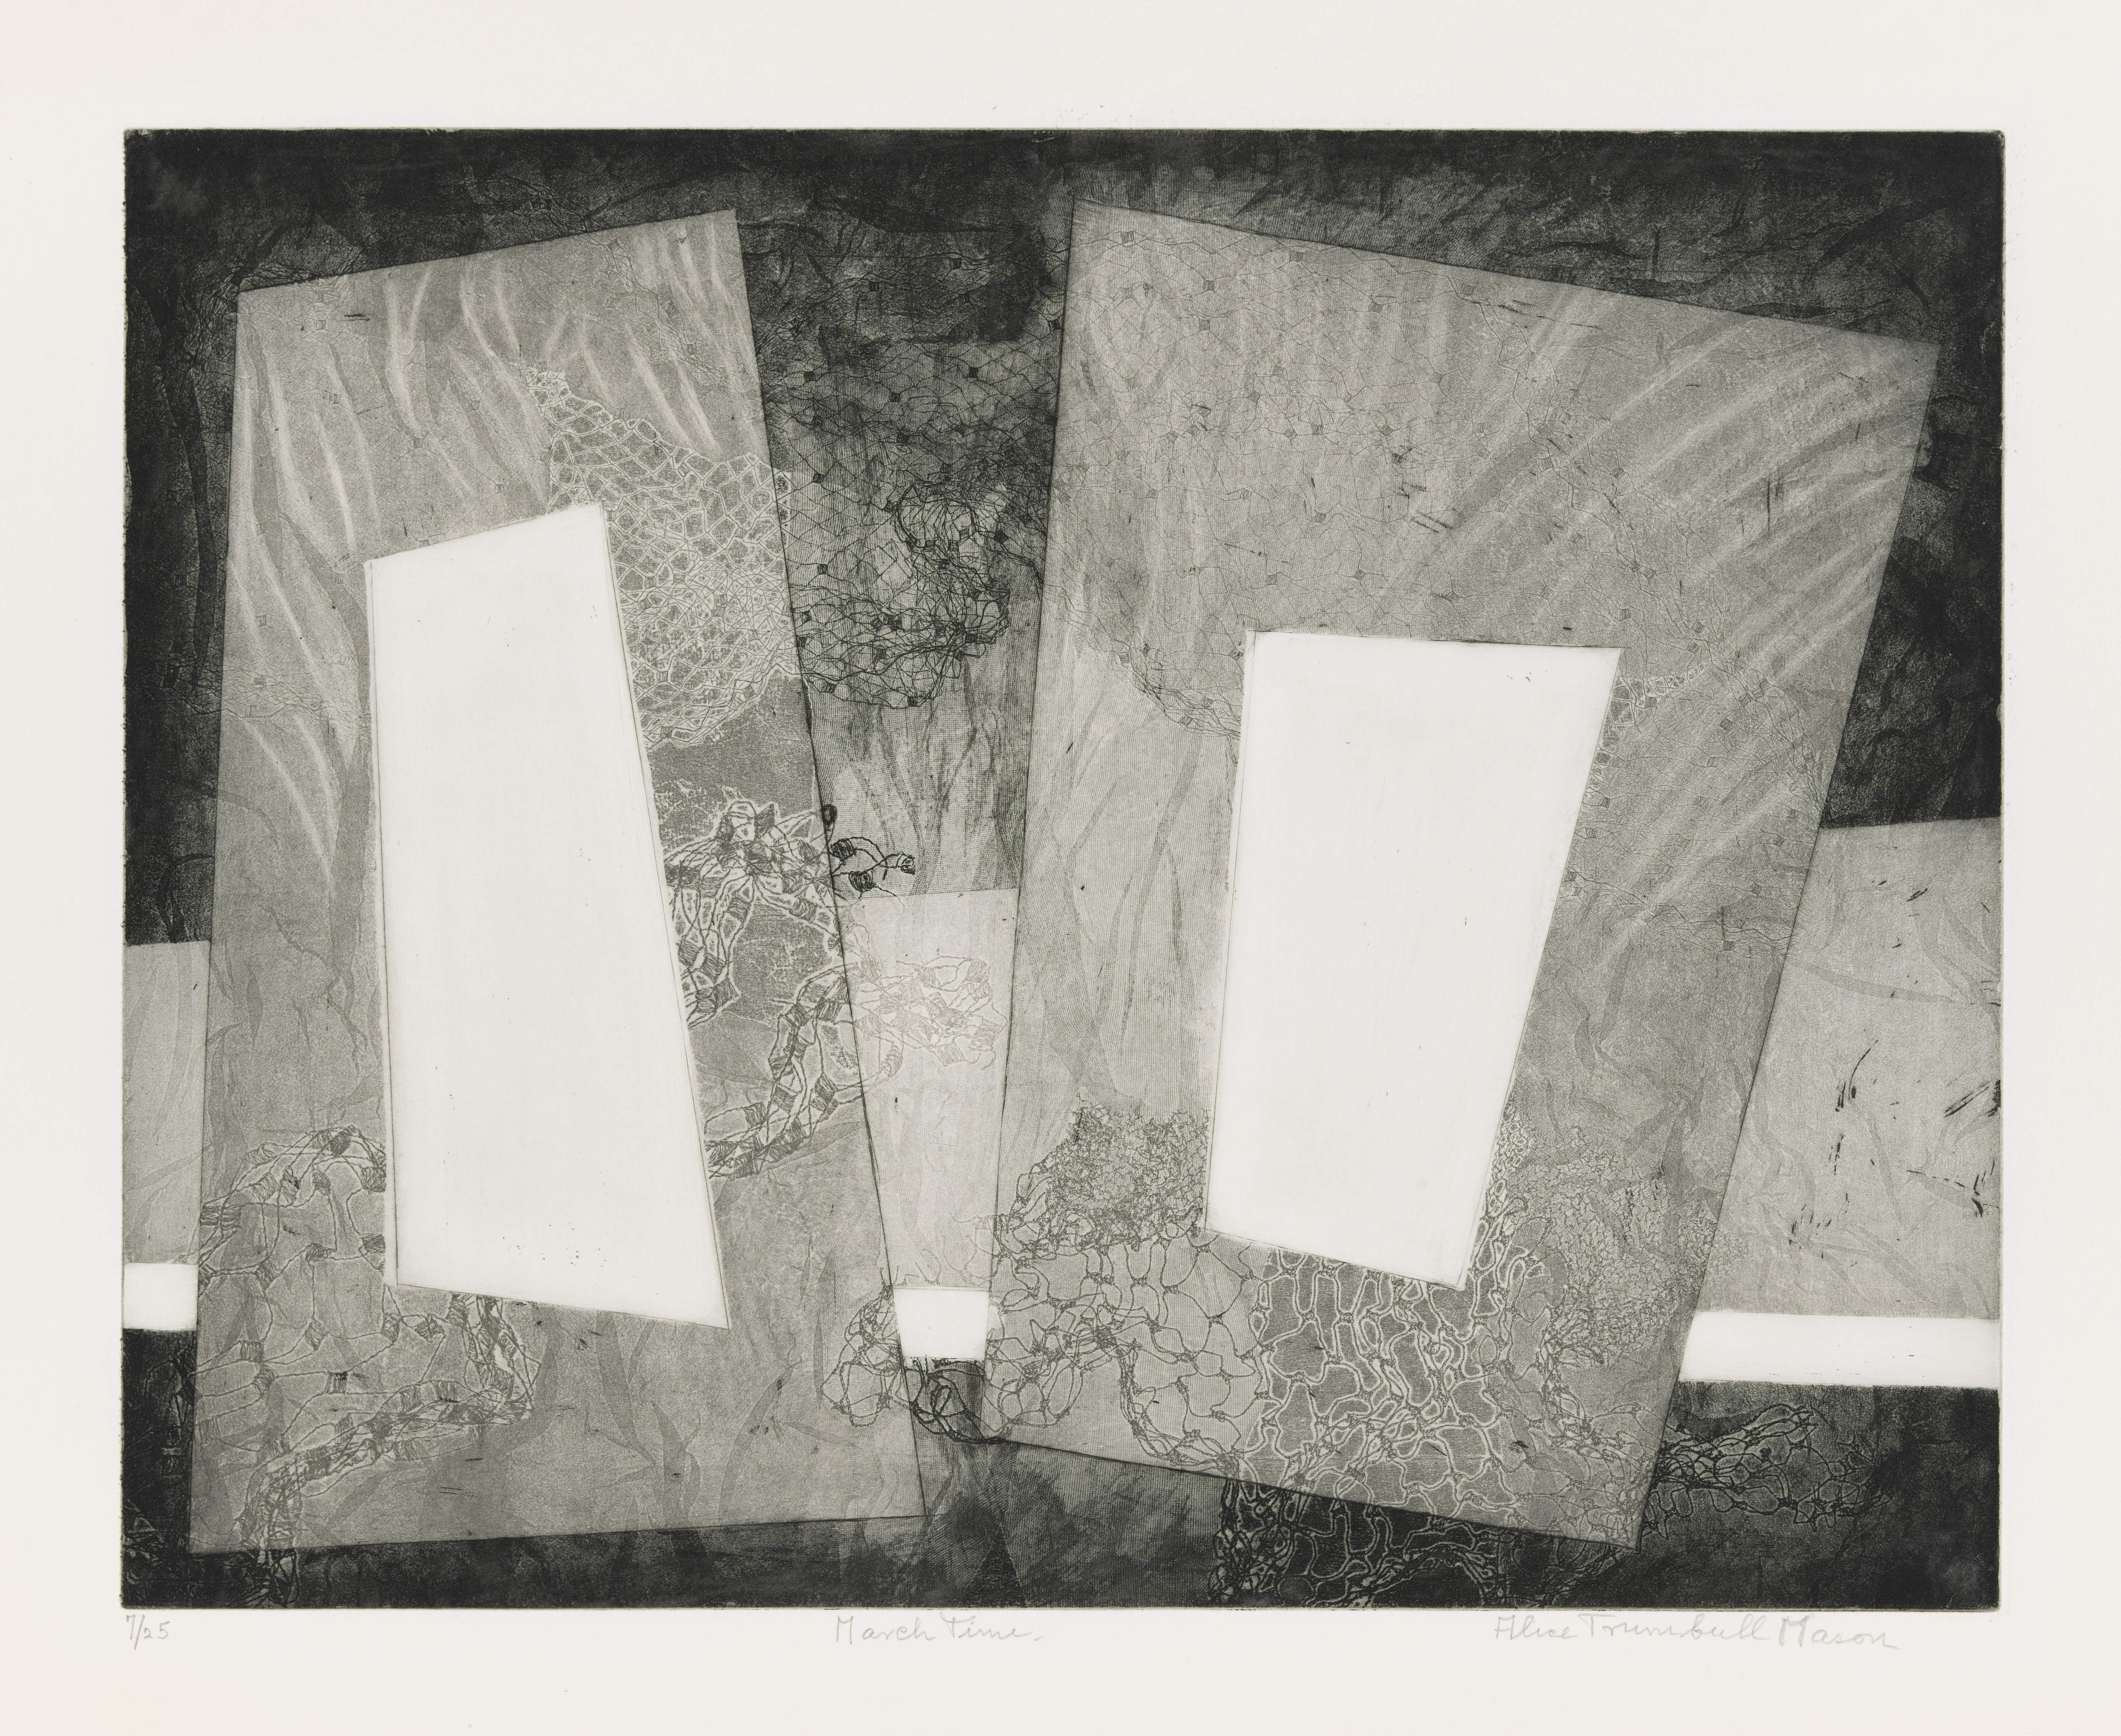 Abstract grey-toned etching of two slanted rectangular forms, with smaller white rectangular forms in their centers. Net-like texture is punctuated throughout the composition.